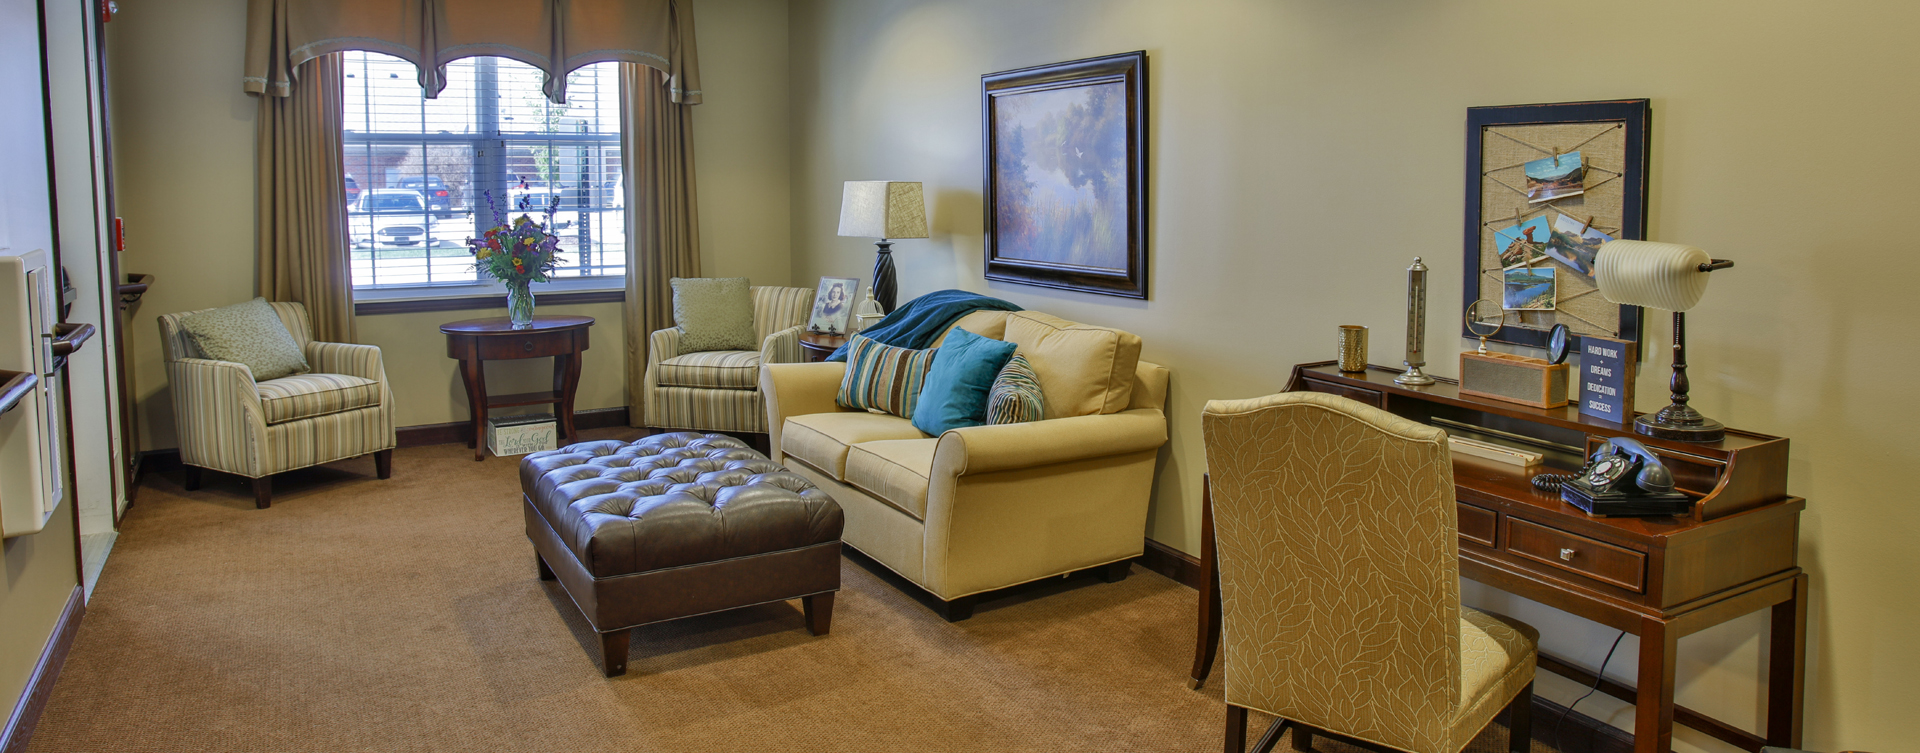 Enjoy a good book in the sitting area at Bickford of Bloomington